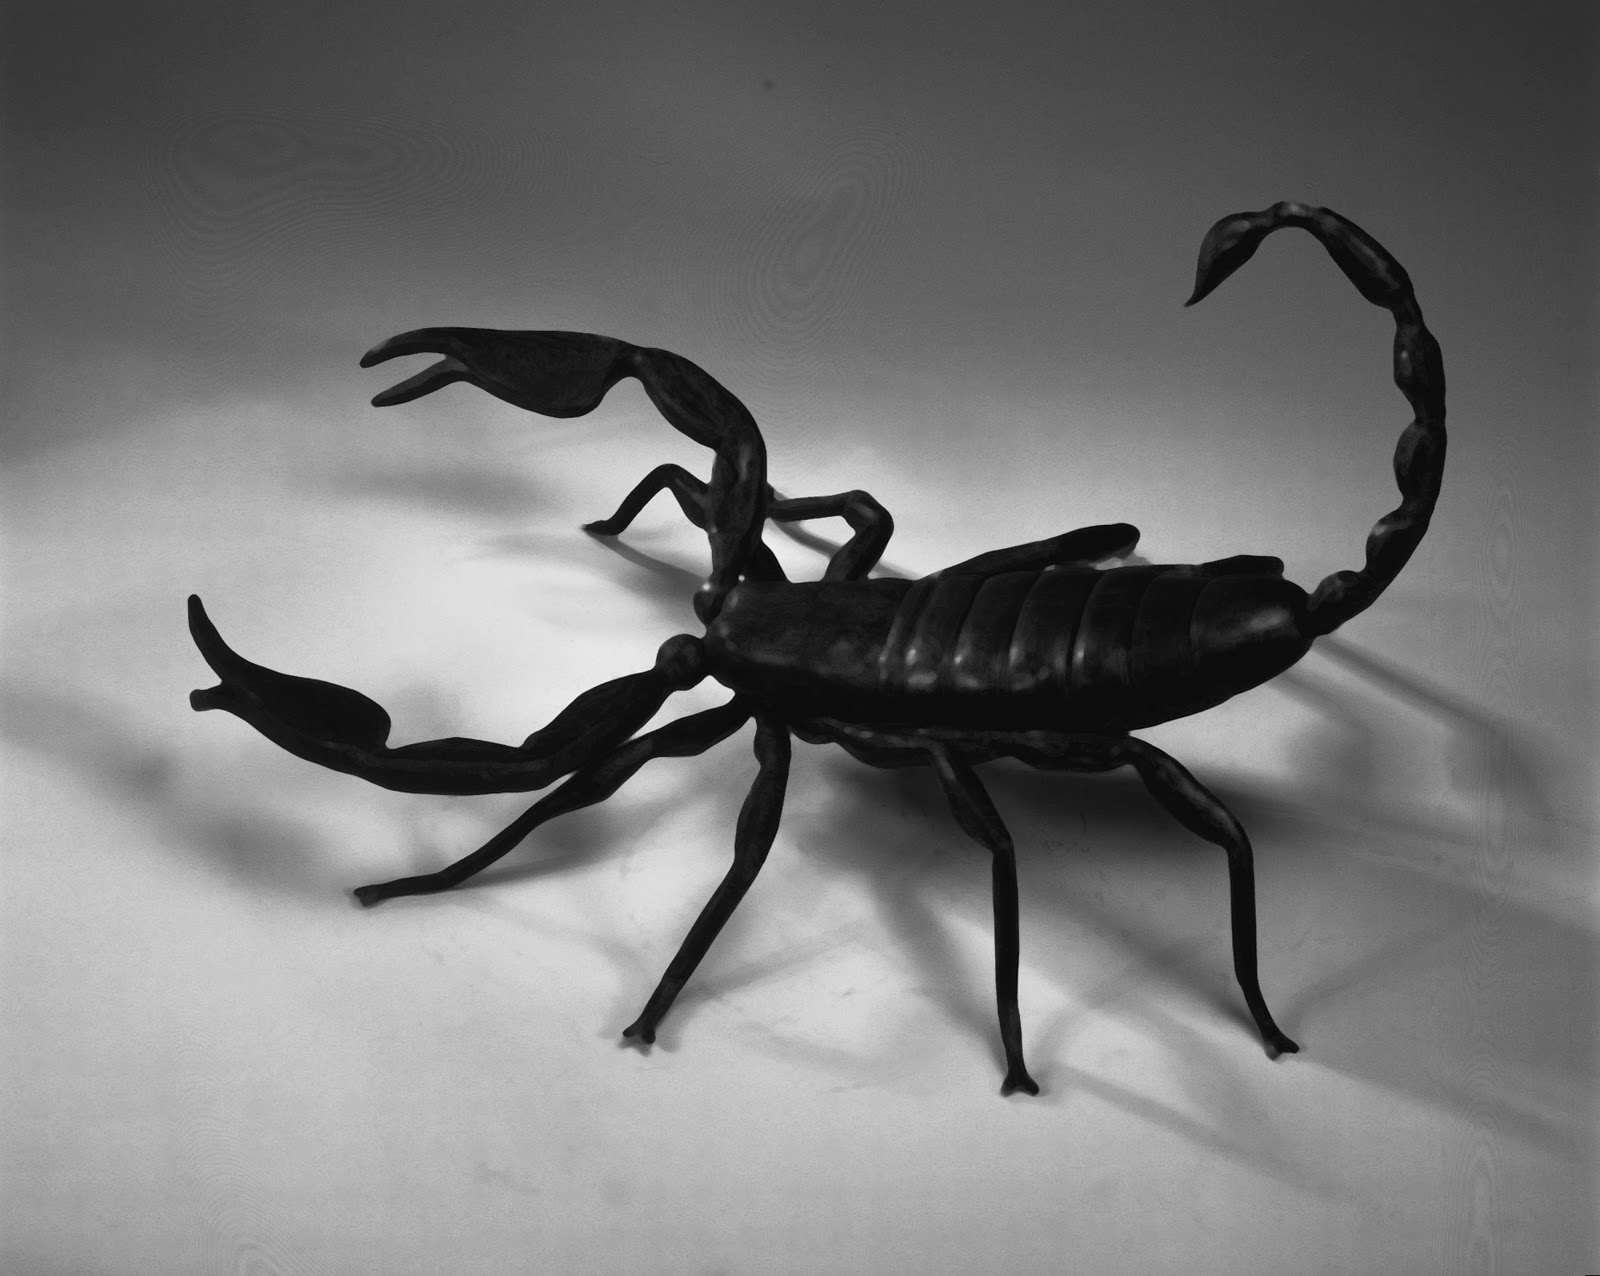 Scorpion wallpapers, Animal, HQ Scorpion pictures | 4K Wallpapers 2019